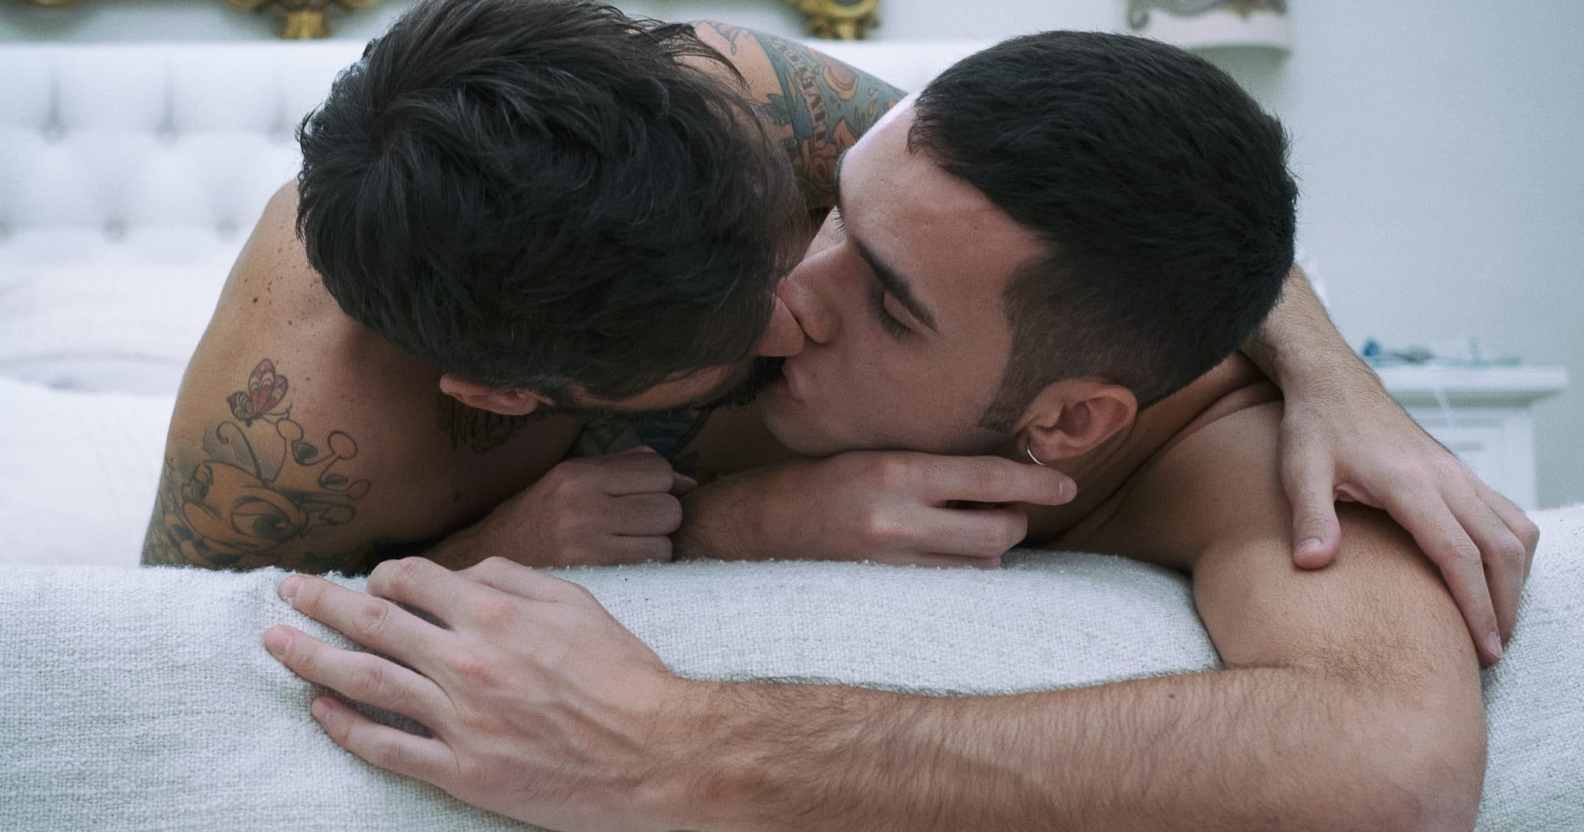 Love In Bed - Gay porn: I'm a lesbian who loves gay male porn. Here's why